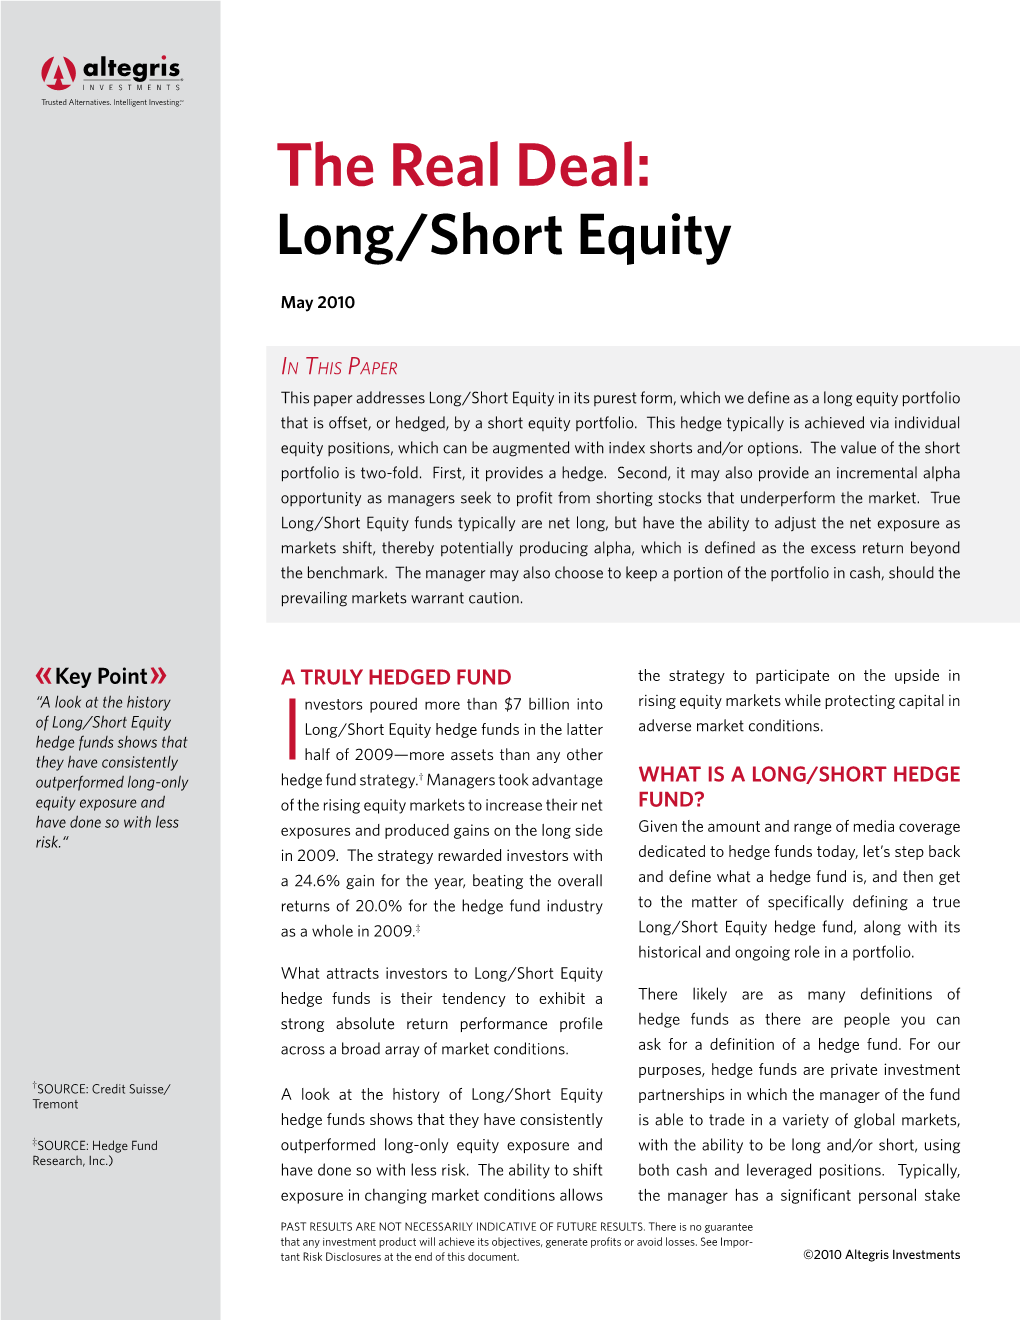 The Real Deal: Long/Short Equity